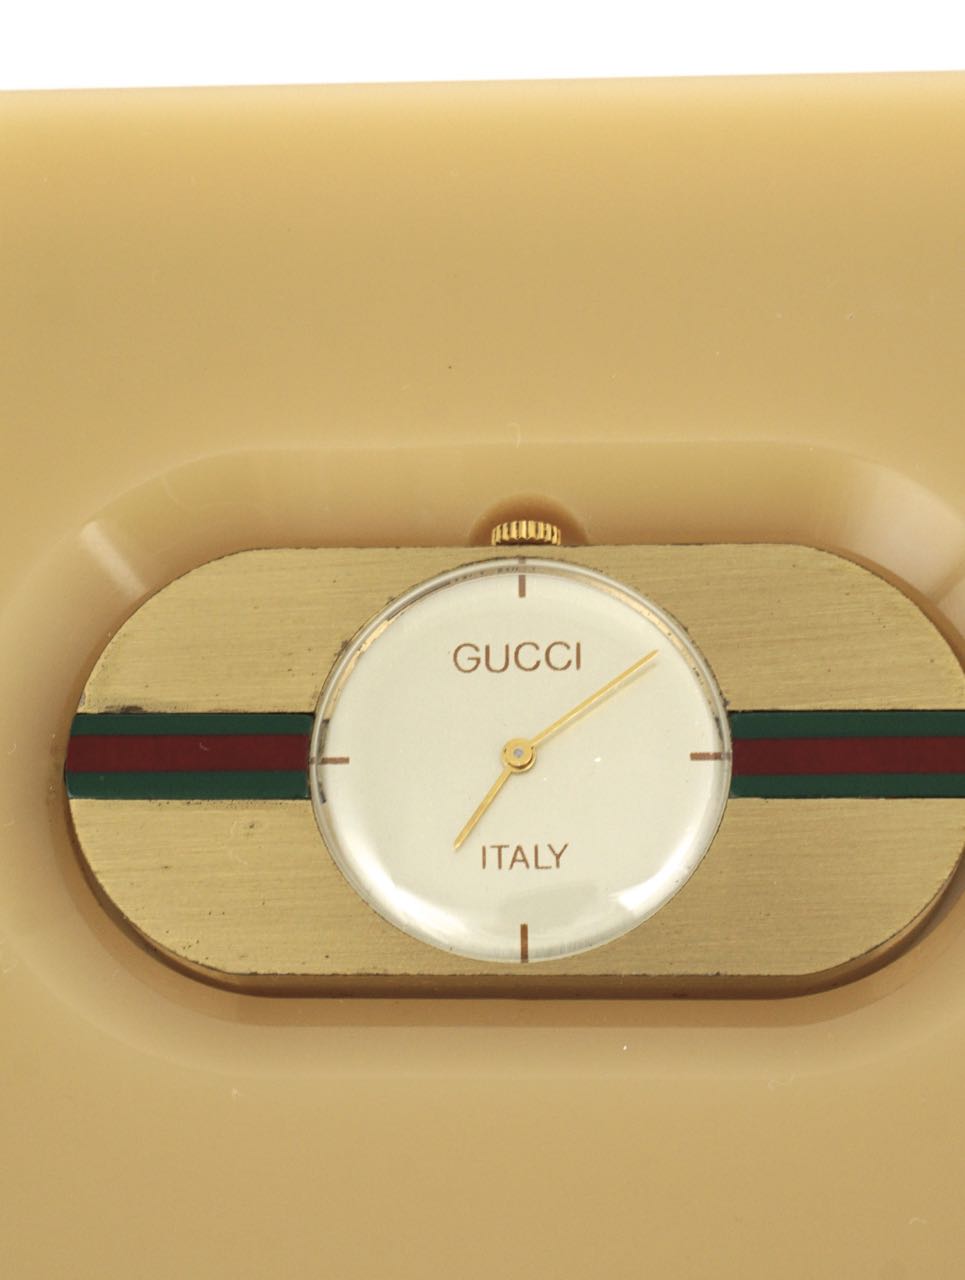 Vintage Gucci lucite and brass travel clock